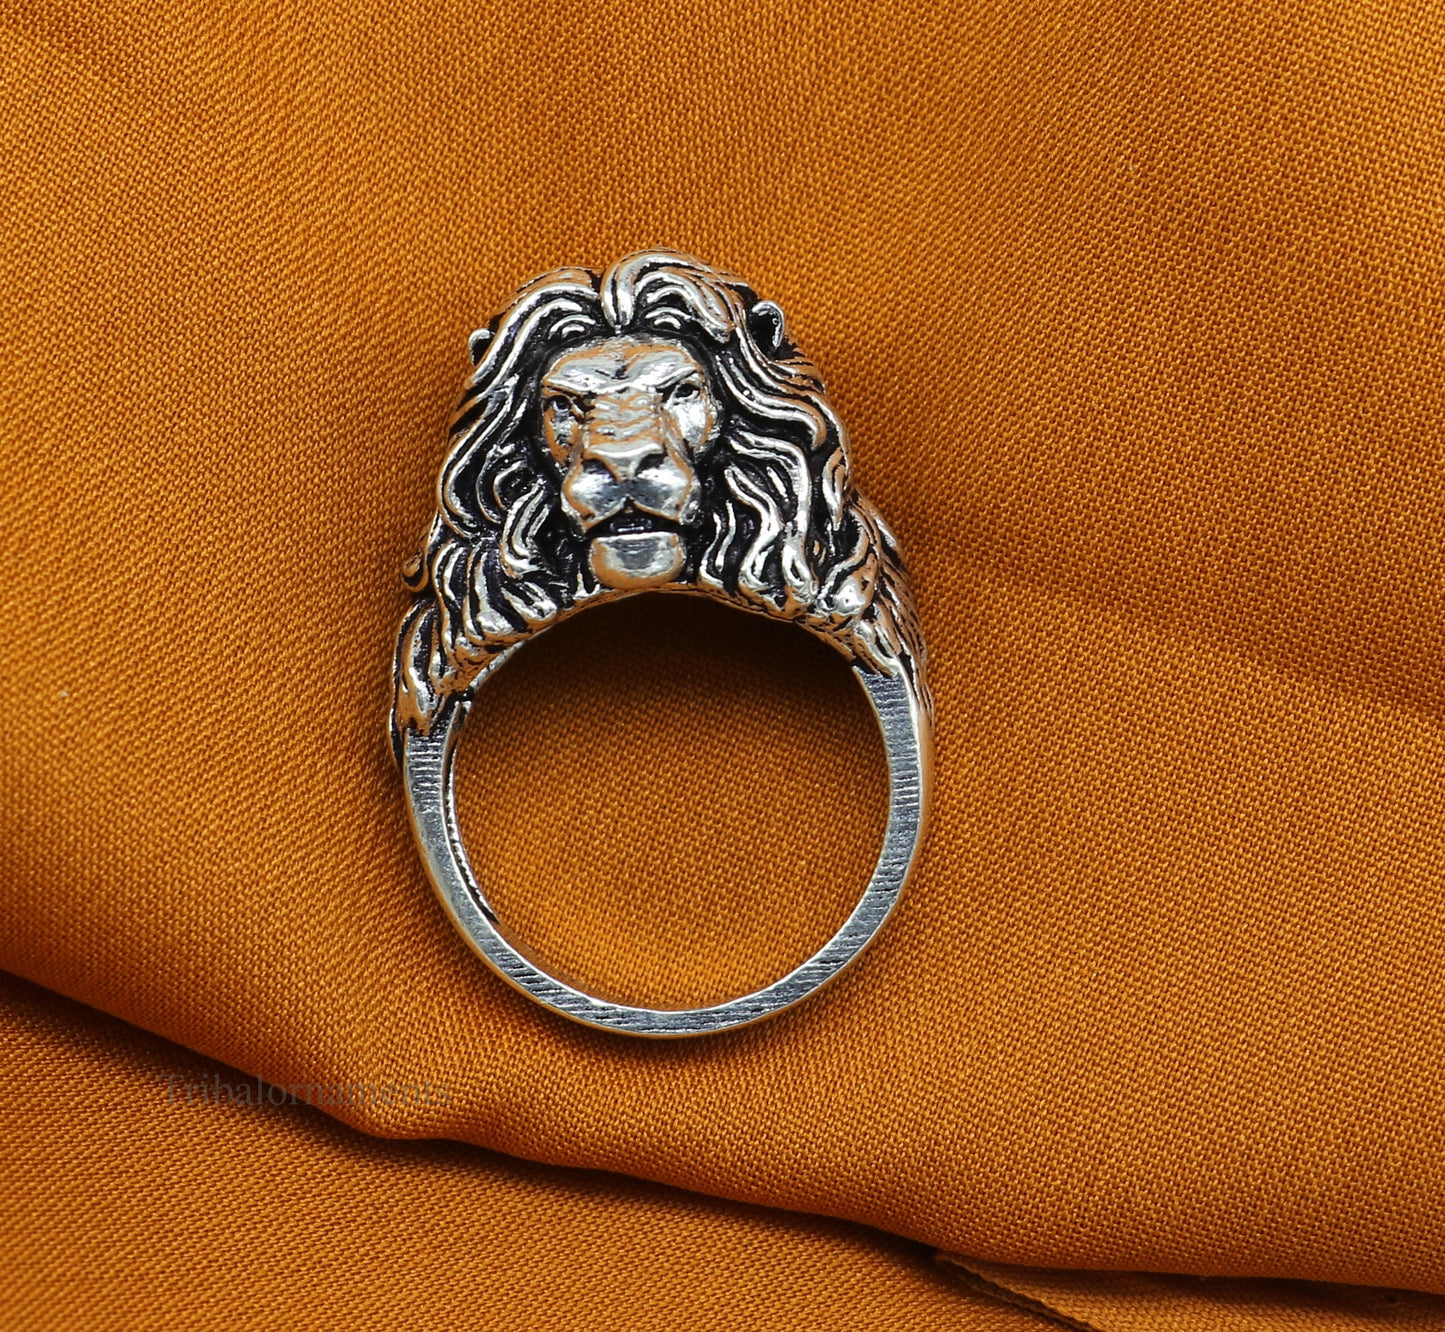 925 sterling silver handcrafted forest king lion face ring, best gifting unisex ring, gorgeous vintage antique stylish ring bands ring435 - TRIBAL ORNAMENTS